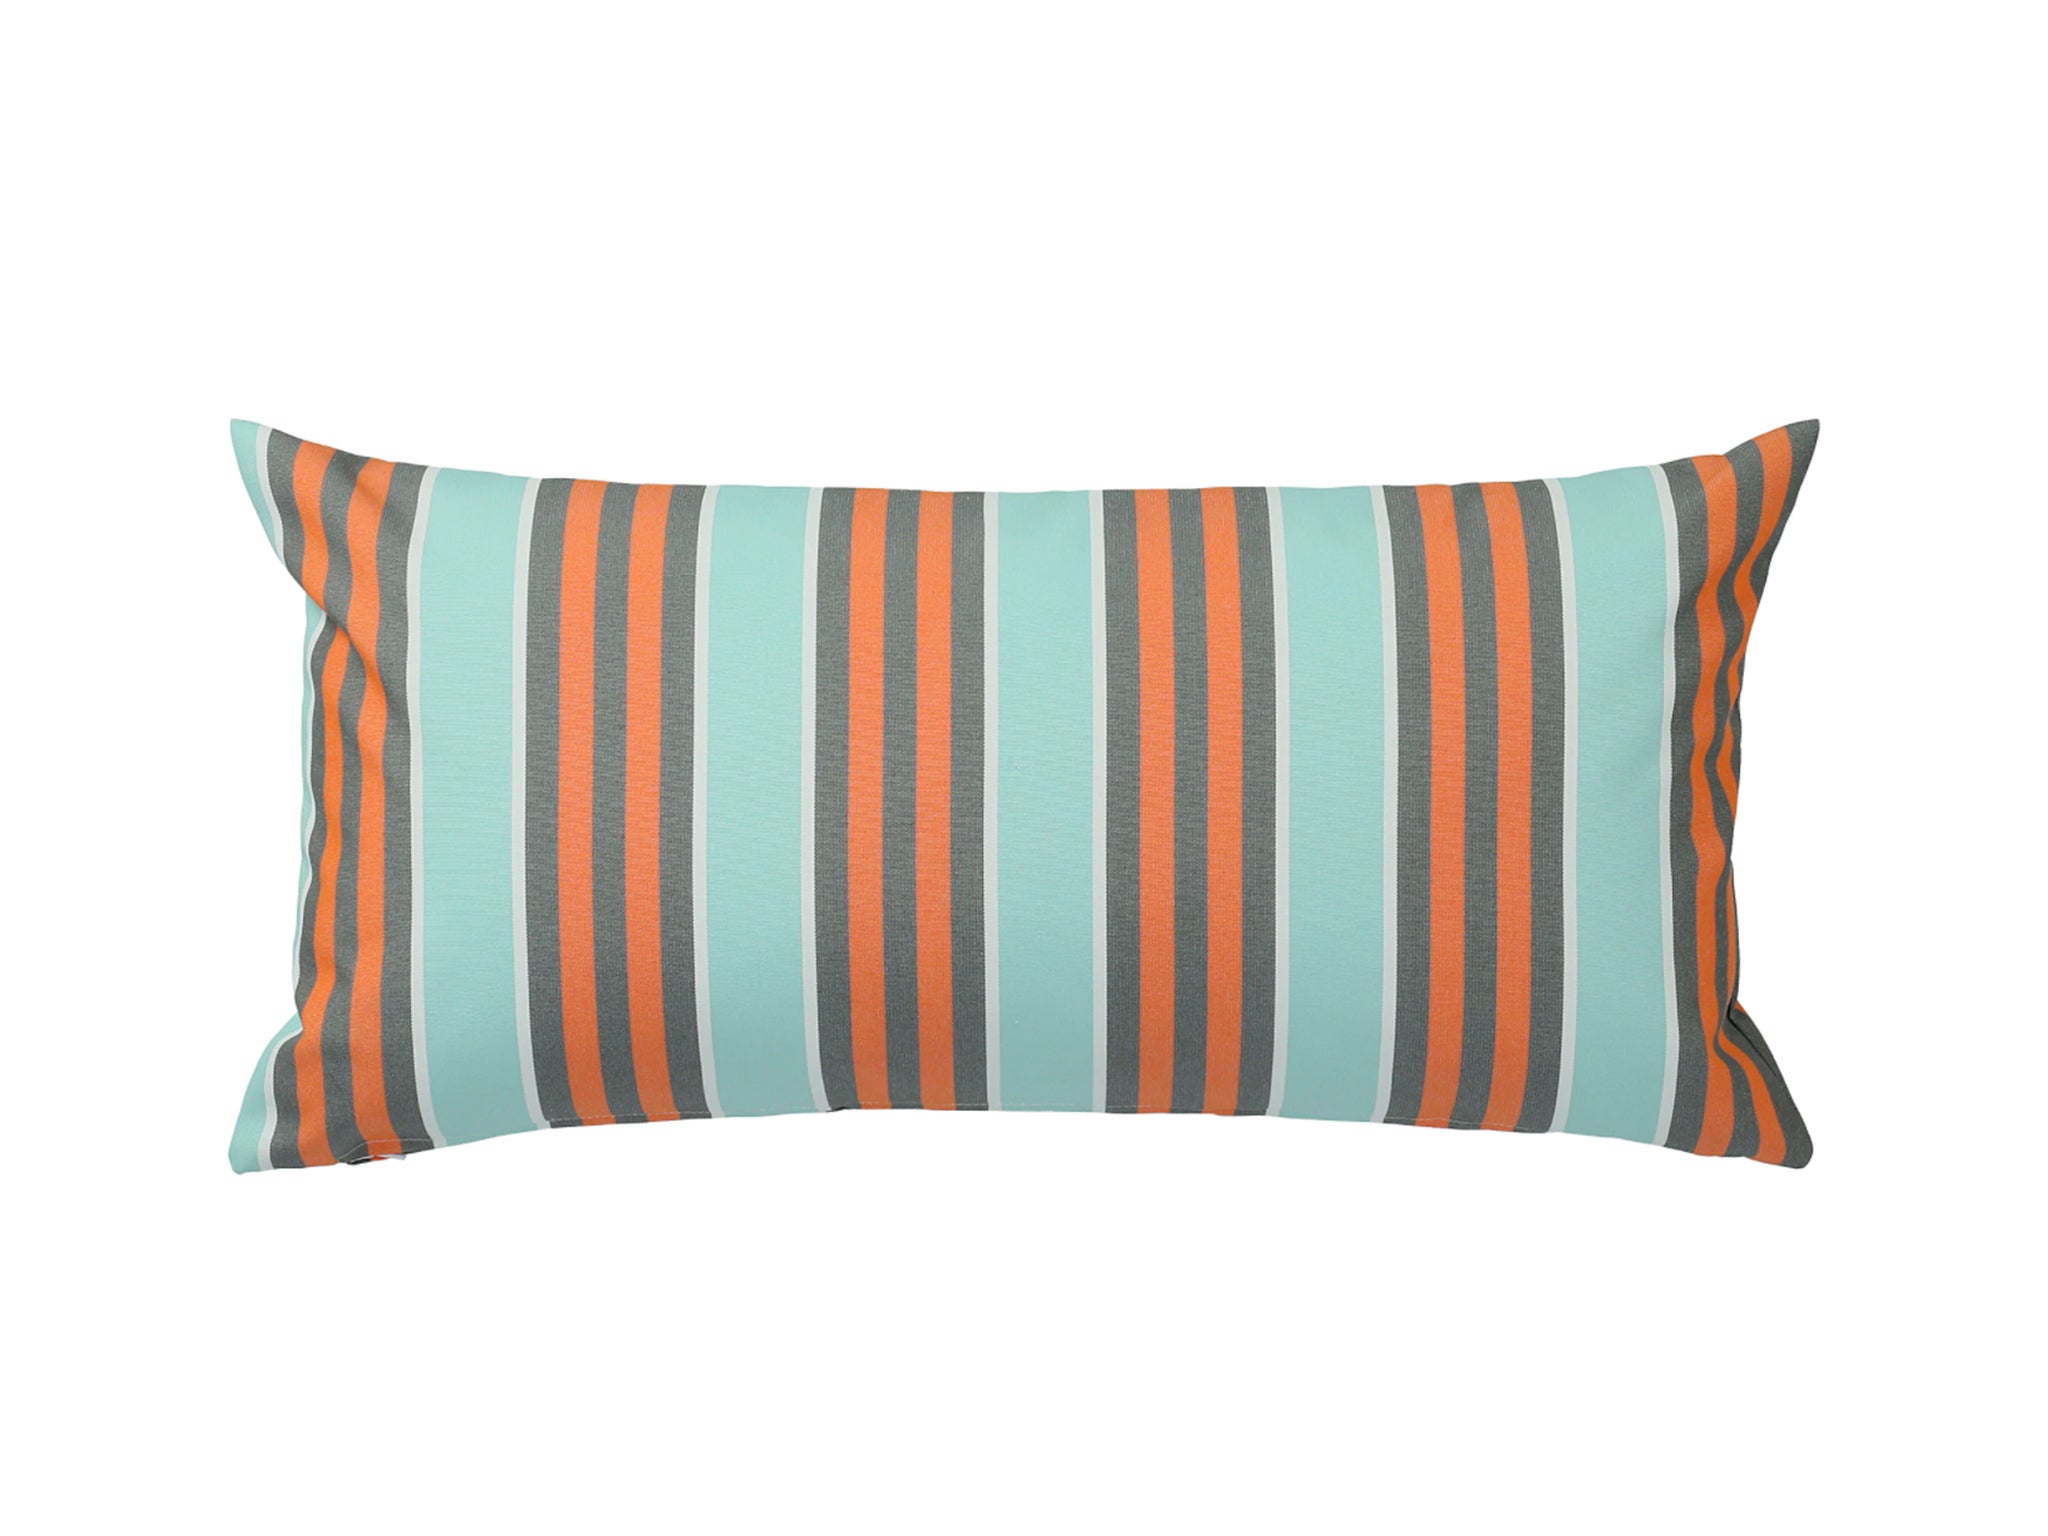 Brightly coloured cushions are an instant update both indoors and outdoors